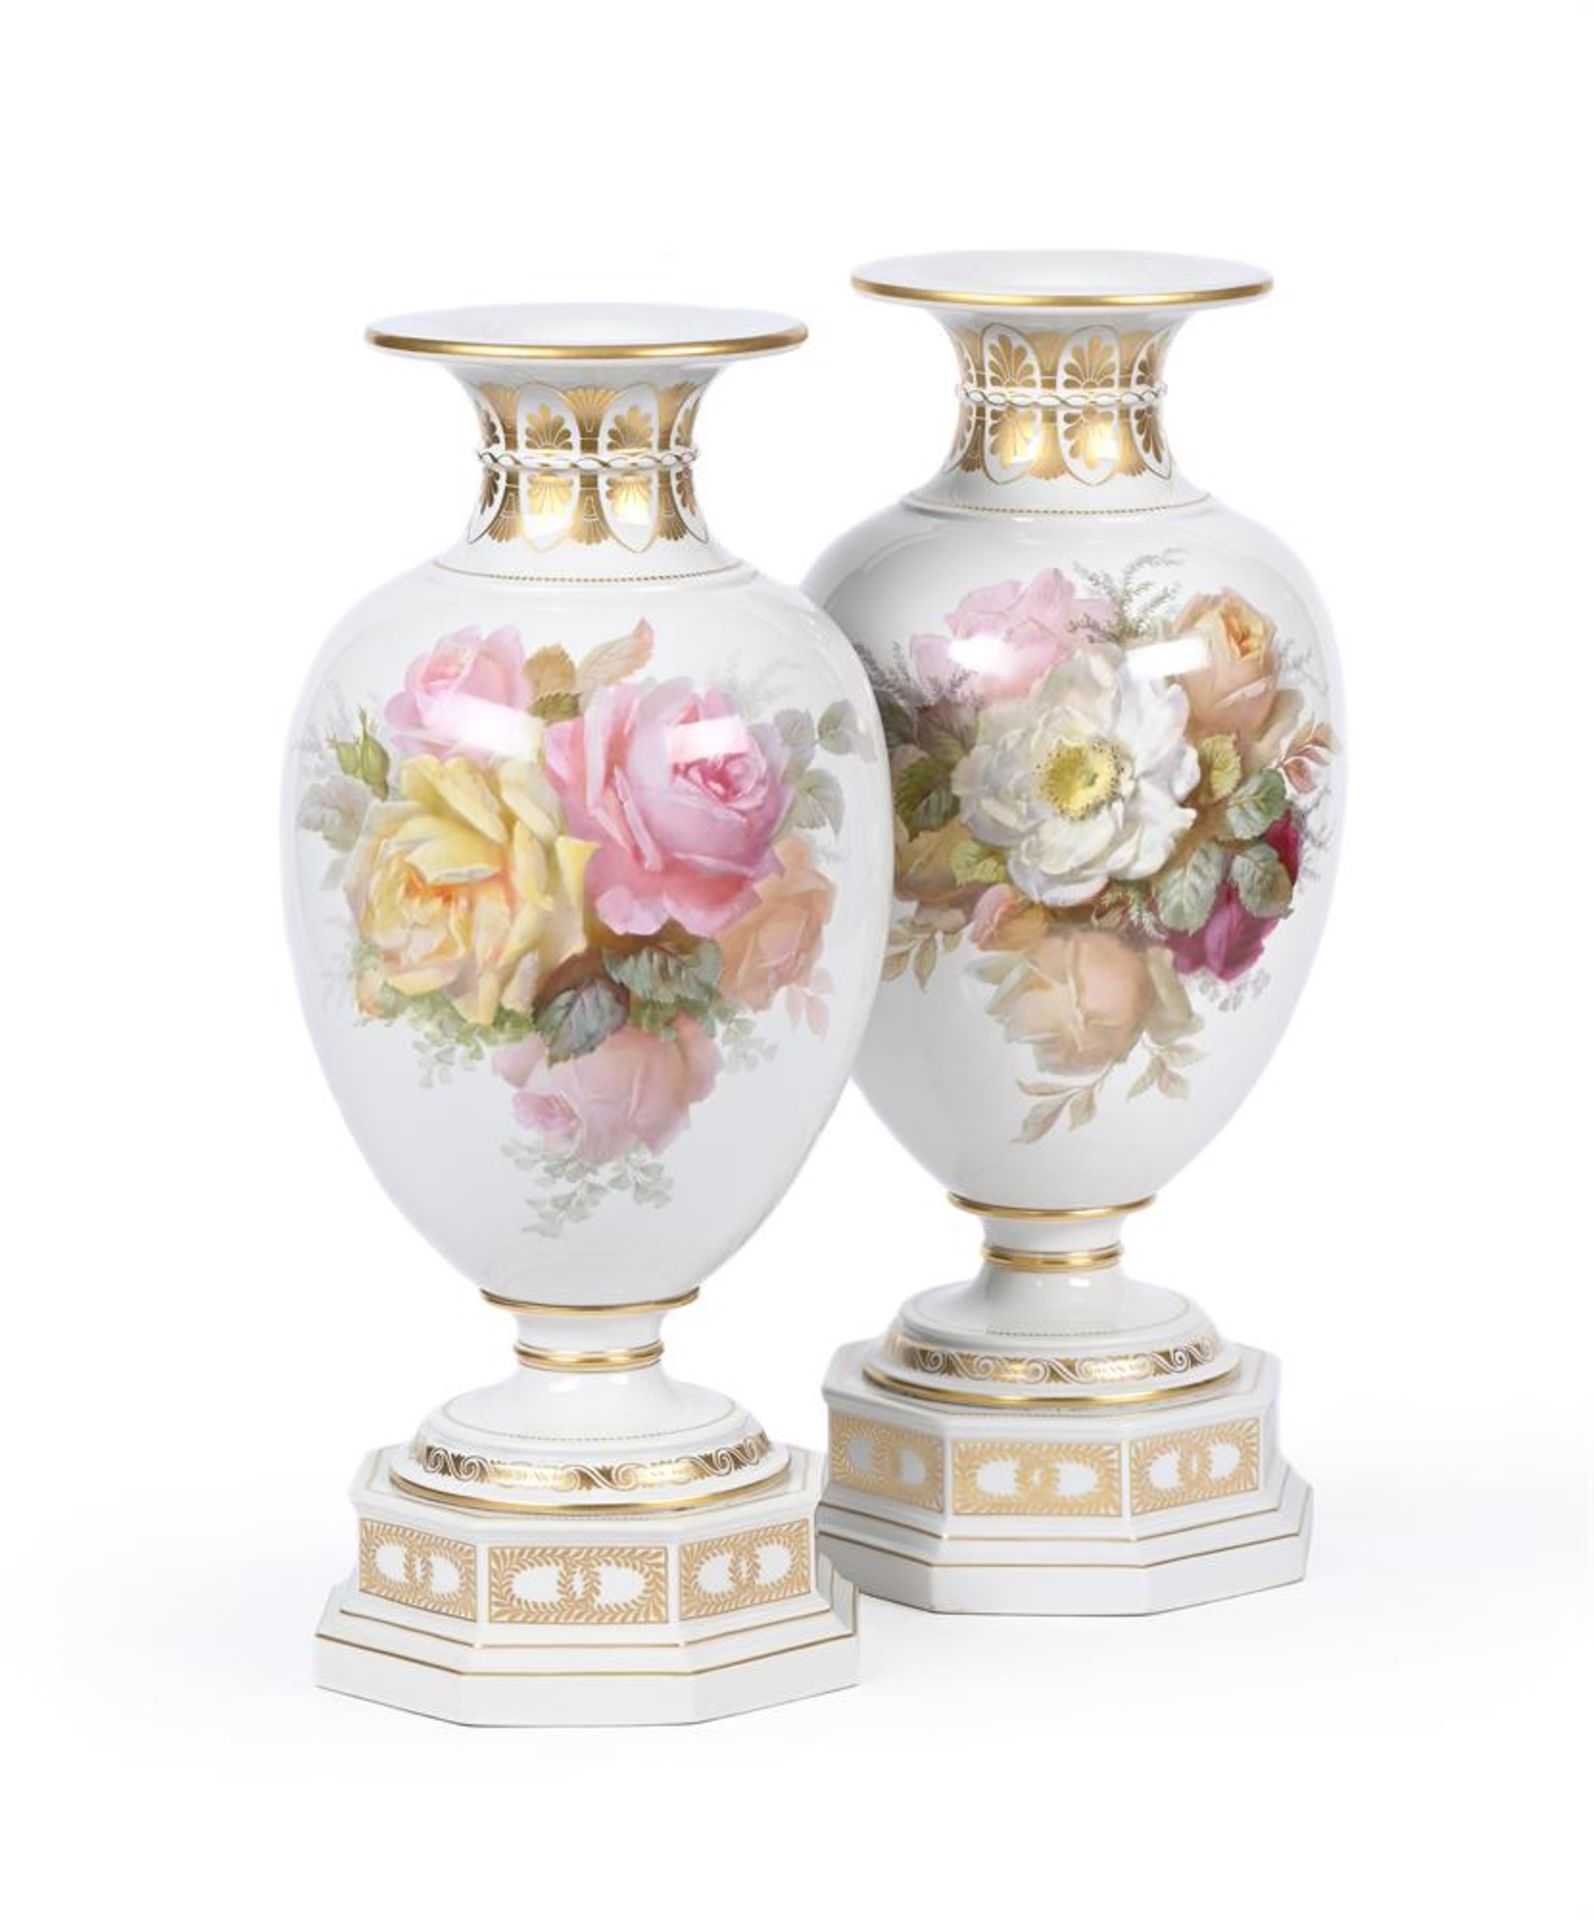 A VERY NEAR PAIR OF BERLIN (KPM) PORCELAIN VASES, CIRCA 1900 - Image 3 of 6